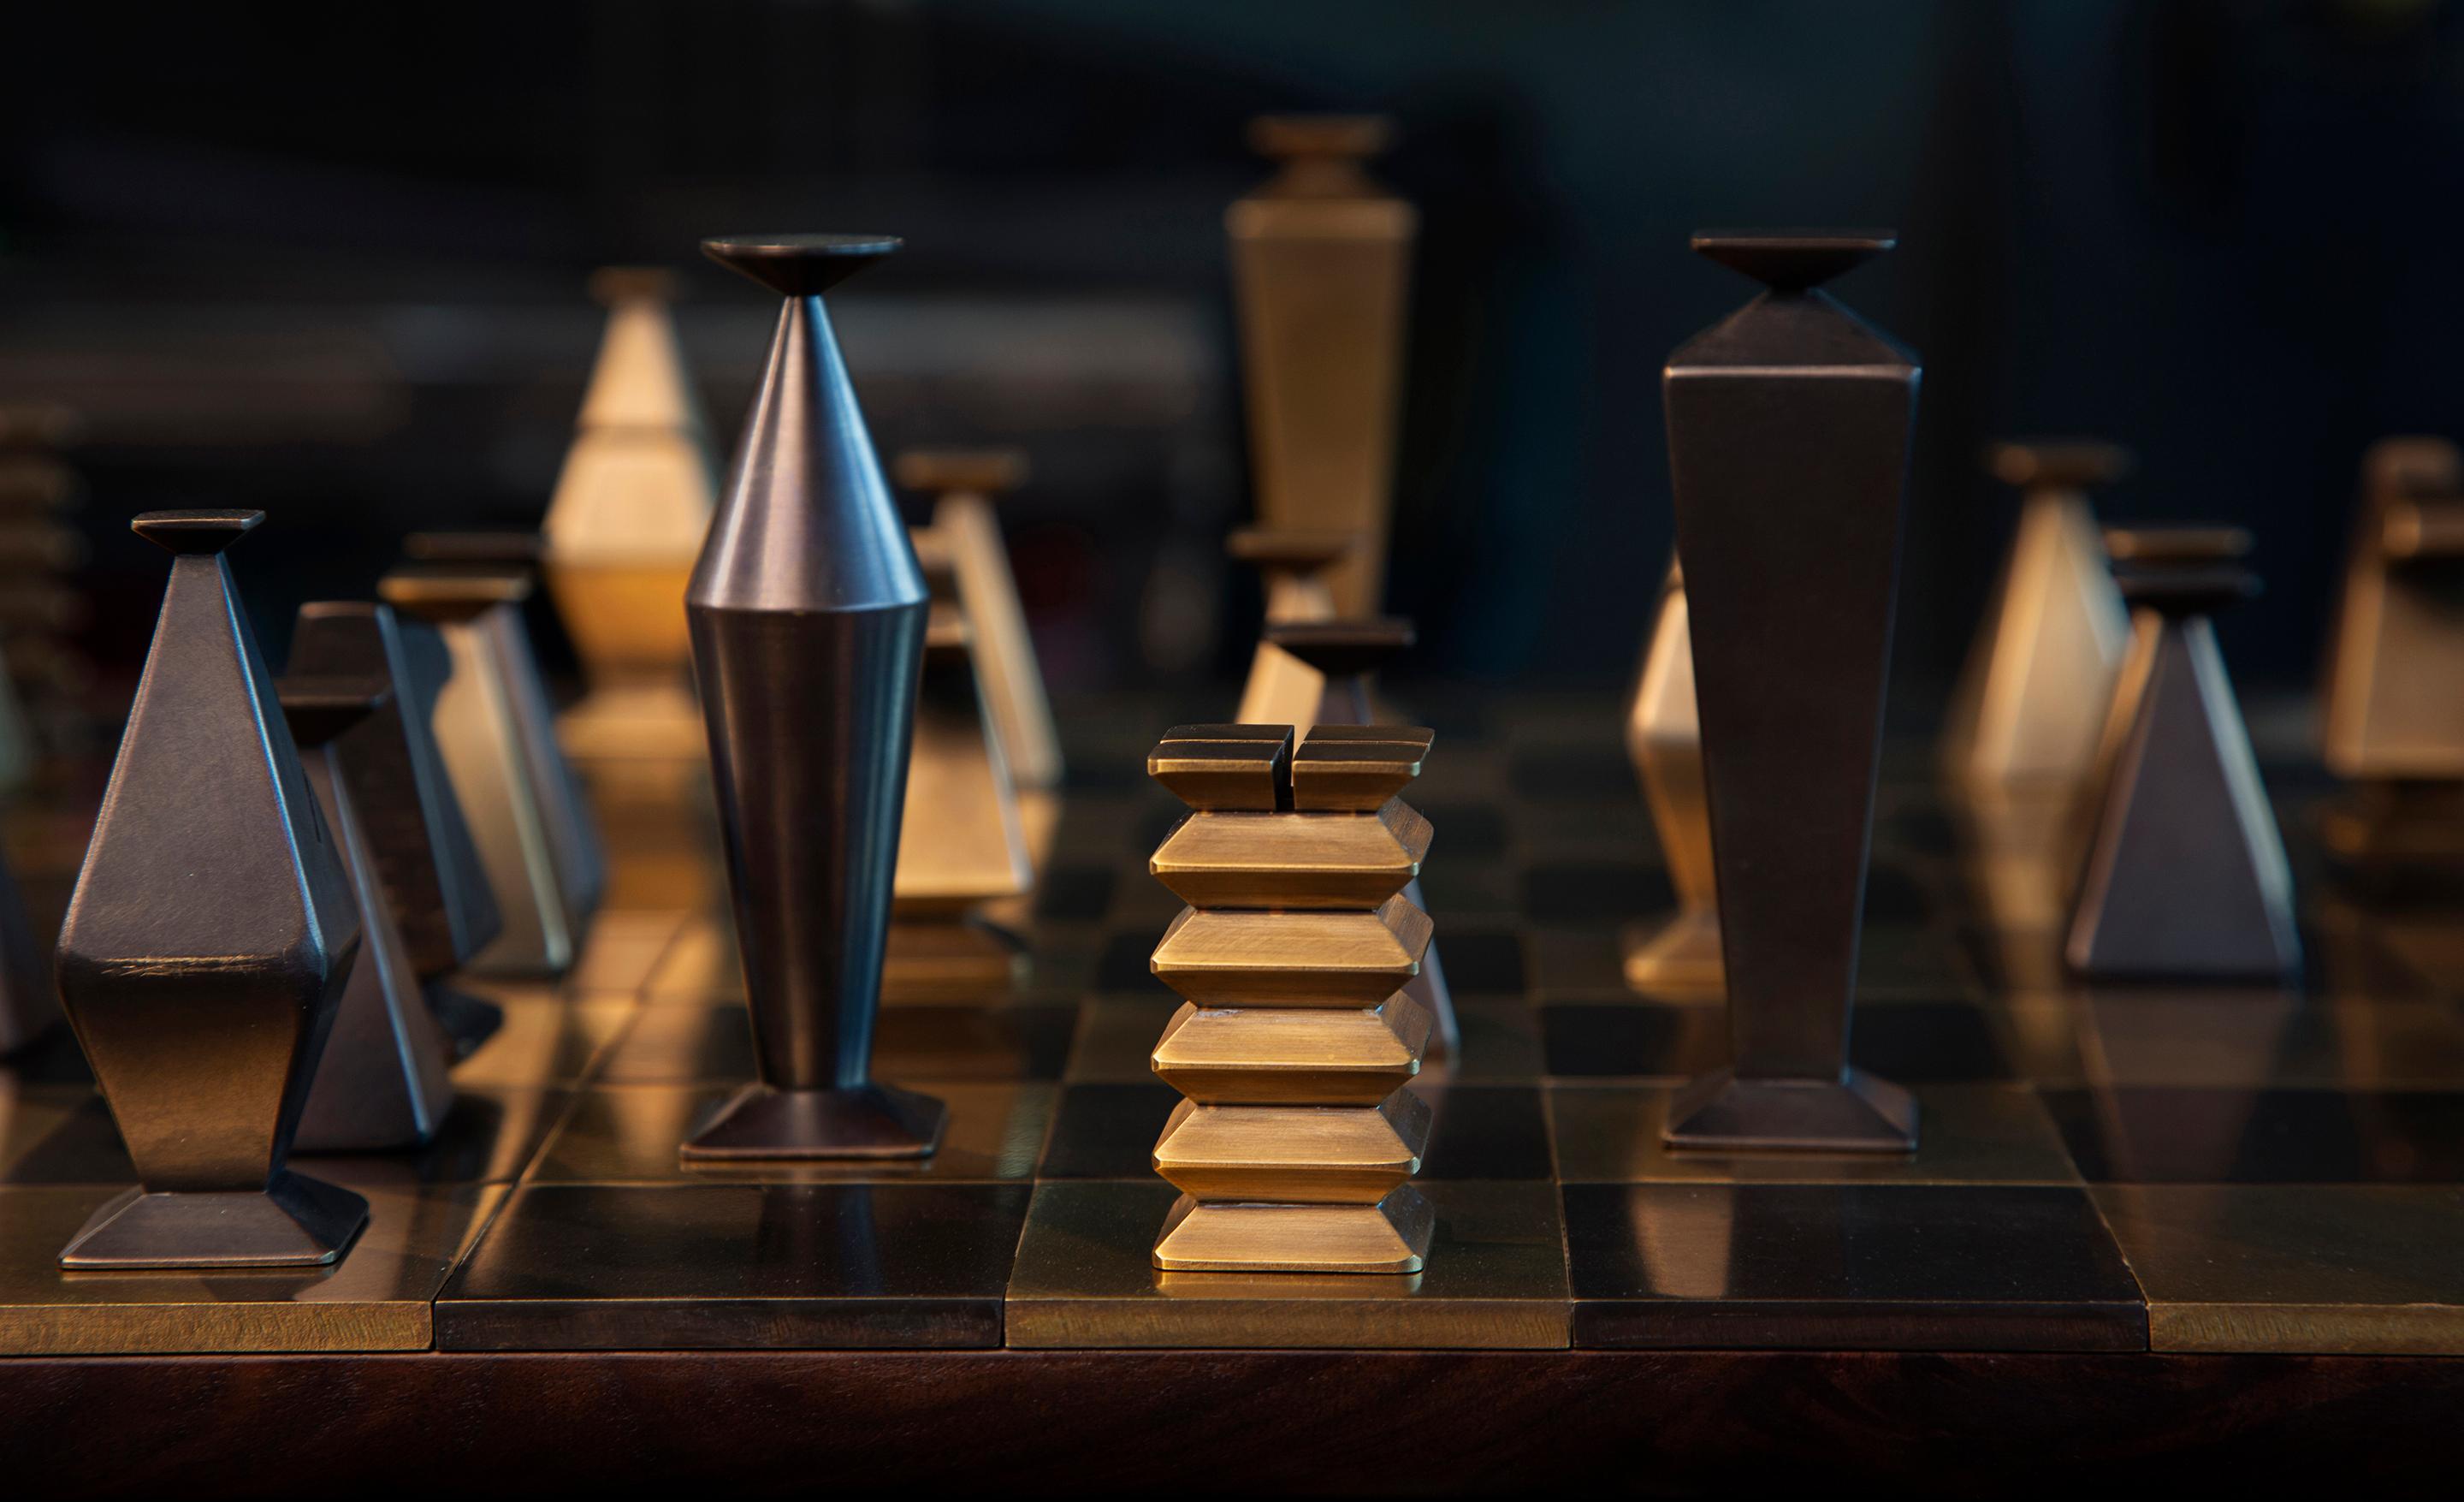 A special chess set in solid, hand-patinated brass and walnut. Handcrafted in the North to order. Available in a range of materials and finishes, Otterburn can truly be customized and utterly unique with endless options and